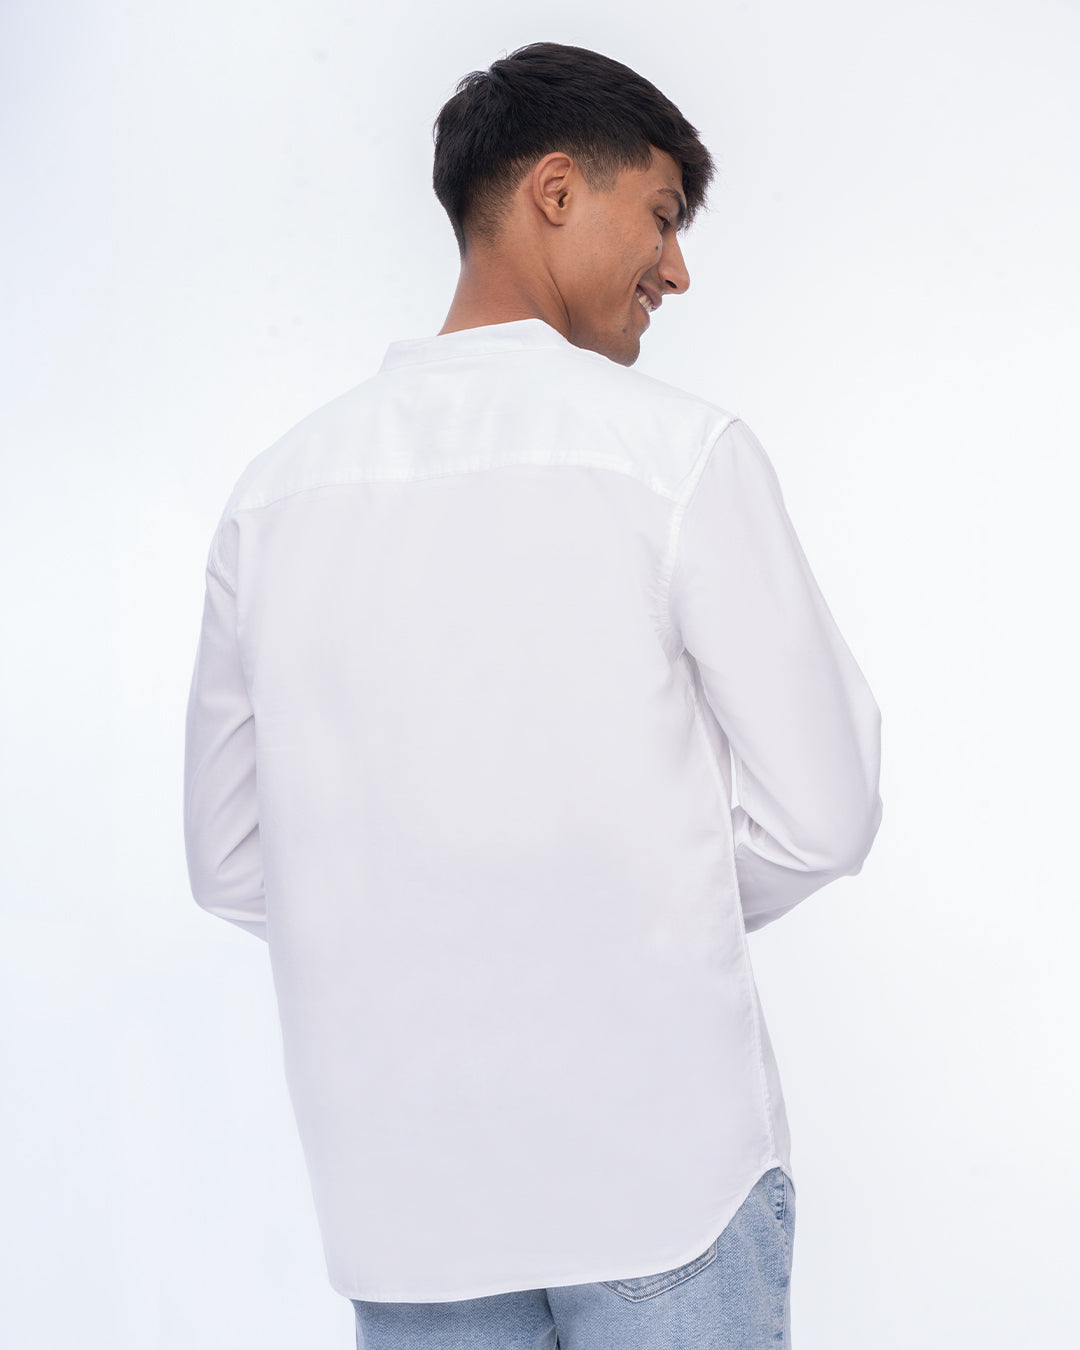 Comfortable white short kurta for men, ideal for casual and festive wear